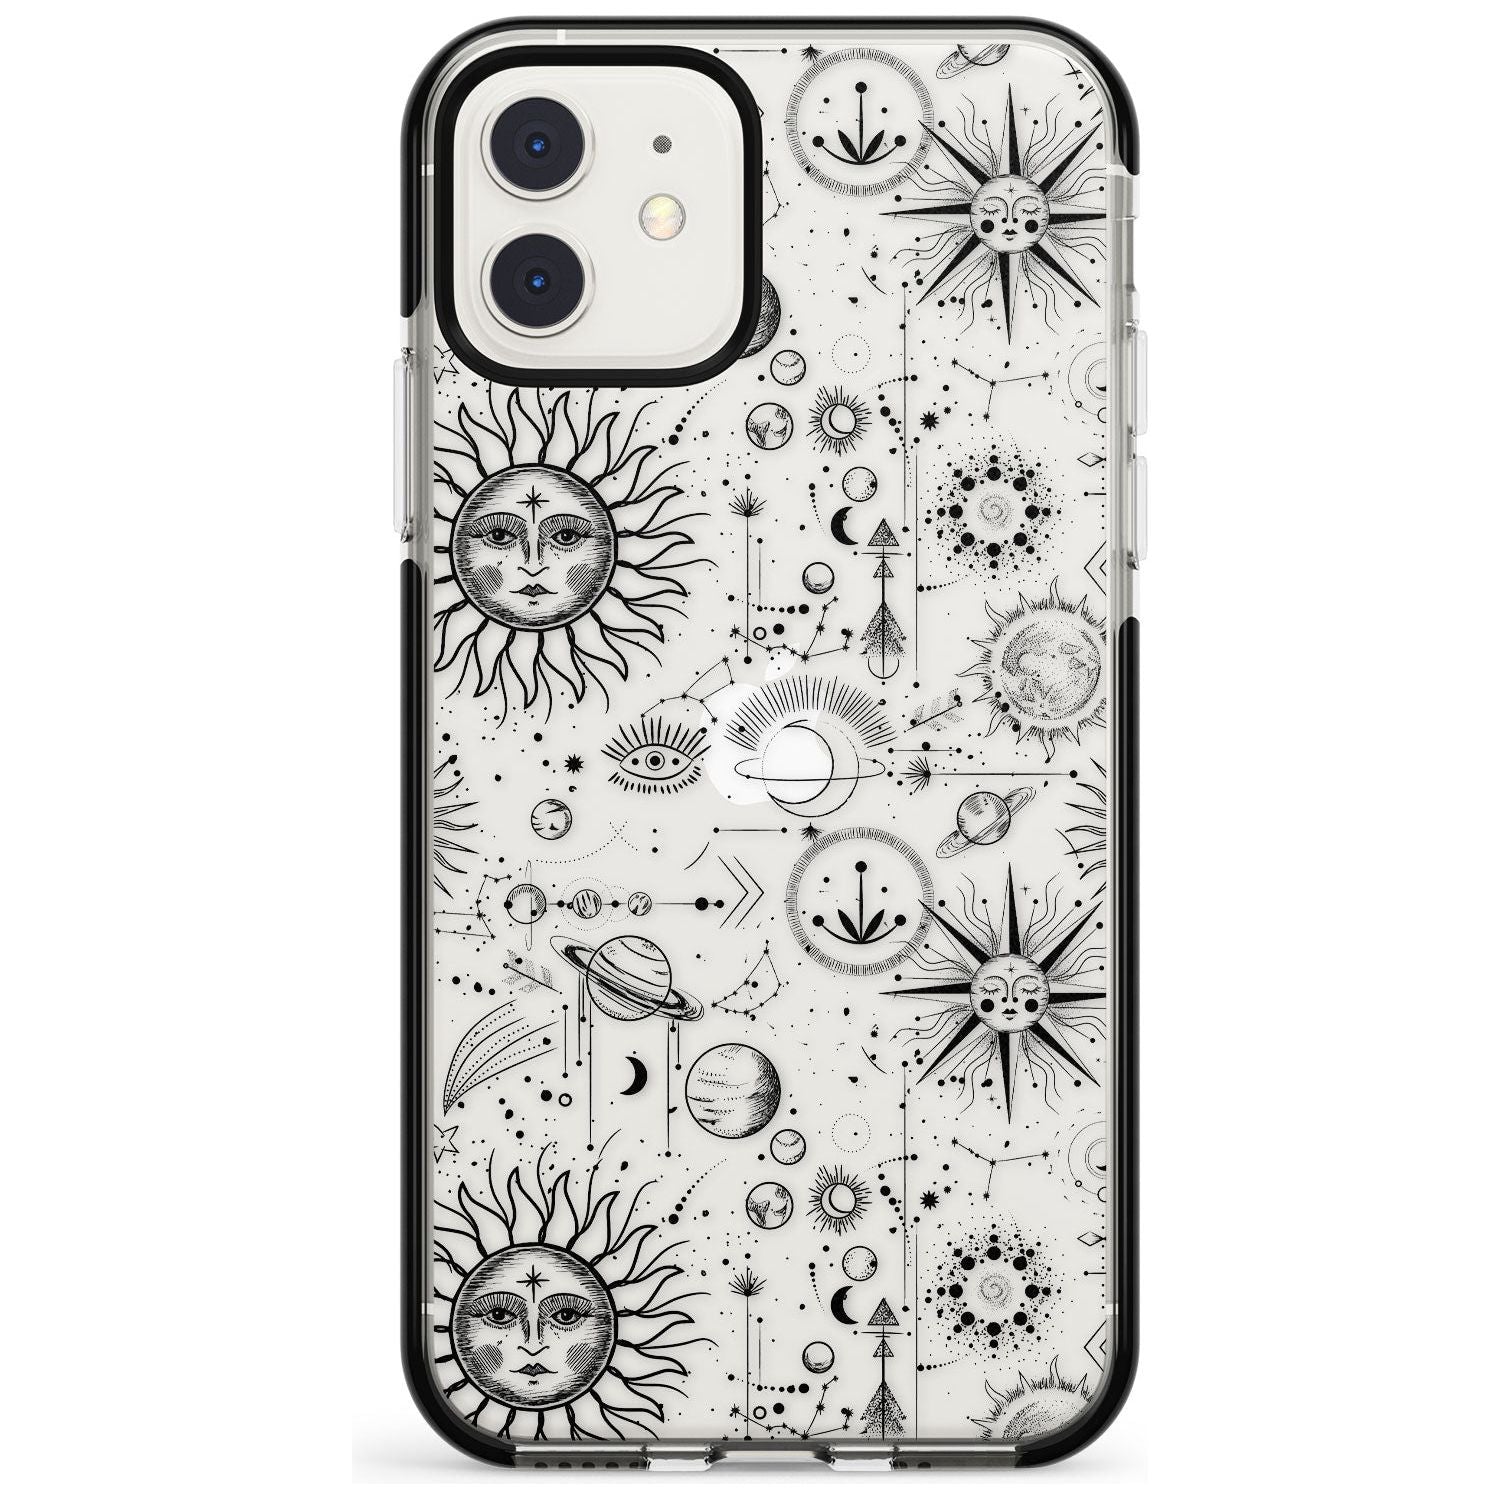 Suns & Planets Astrological Black Impact Phone Case for iPhone 11